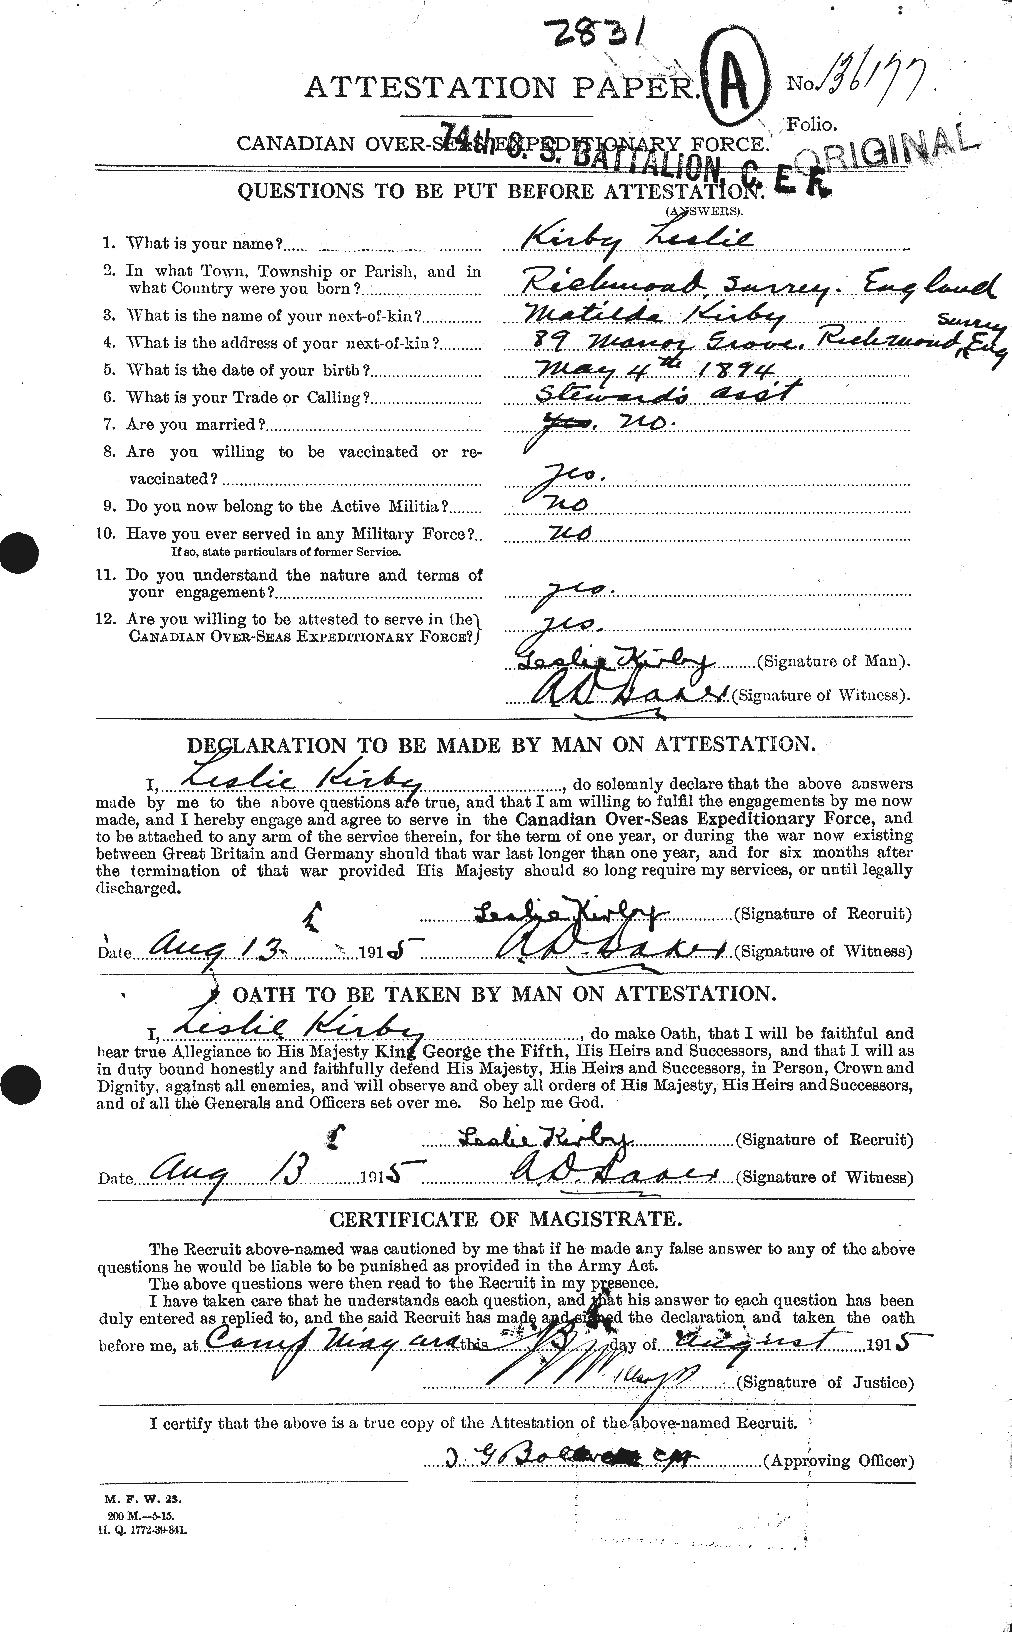 Personnel Records of the First World War - CEF 437249a